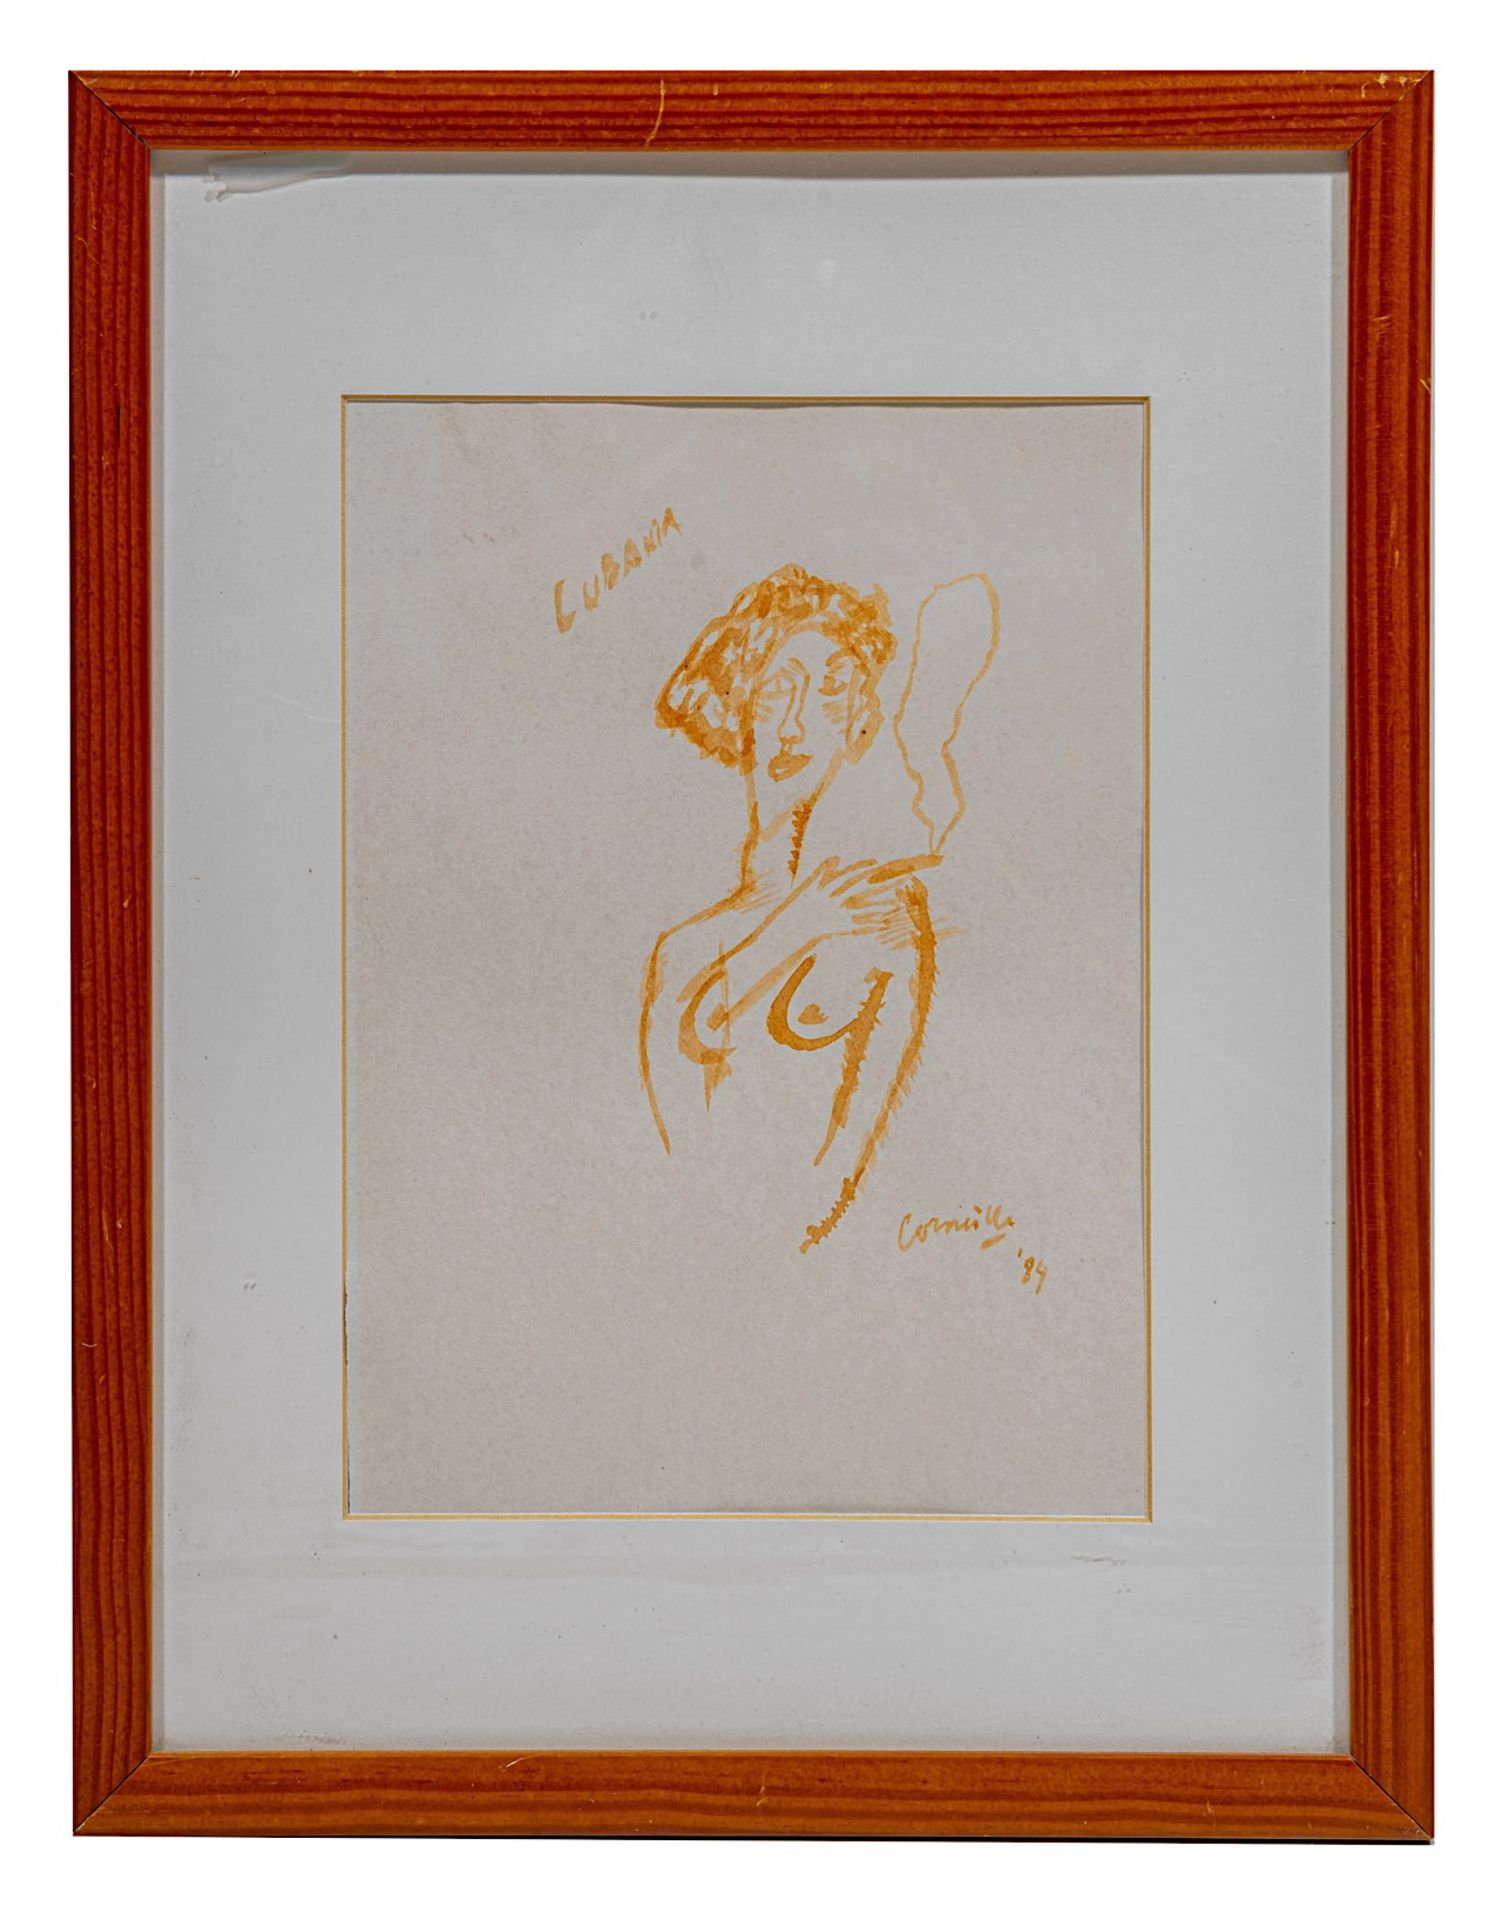 Corneille (1922-2010), 'Lubania', 1984, red watercolour drawing 28 x 20 cm. (11.0 x 7.8 in.), Frame: - Image 2 of 5